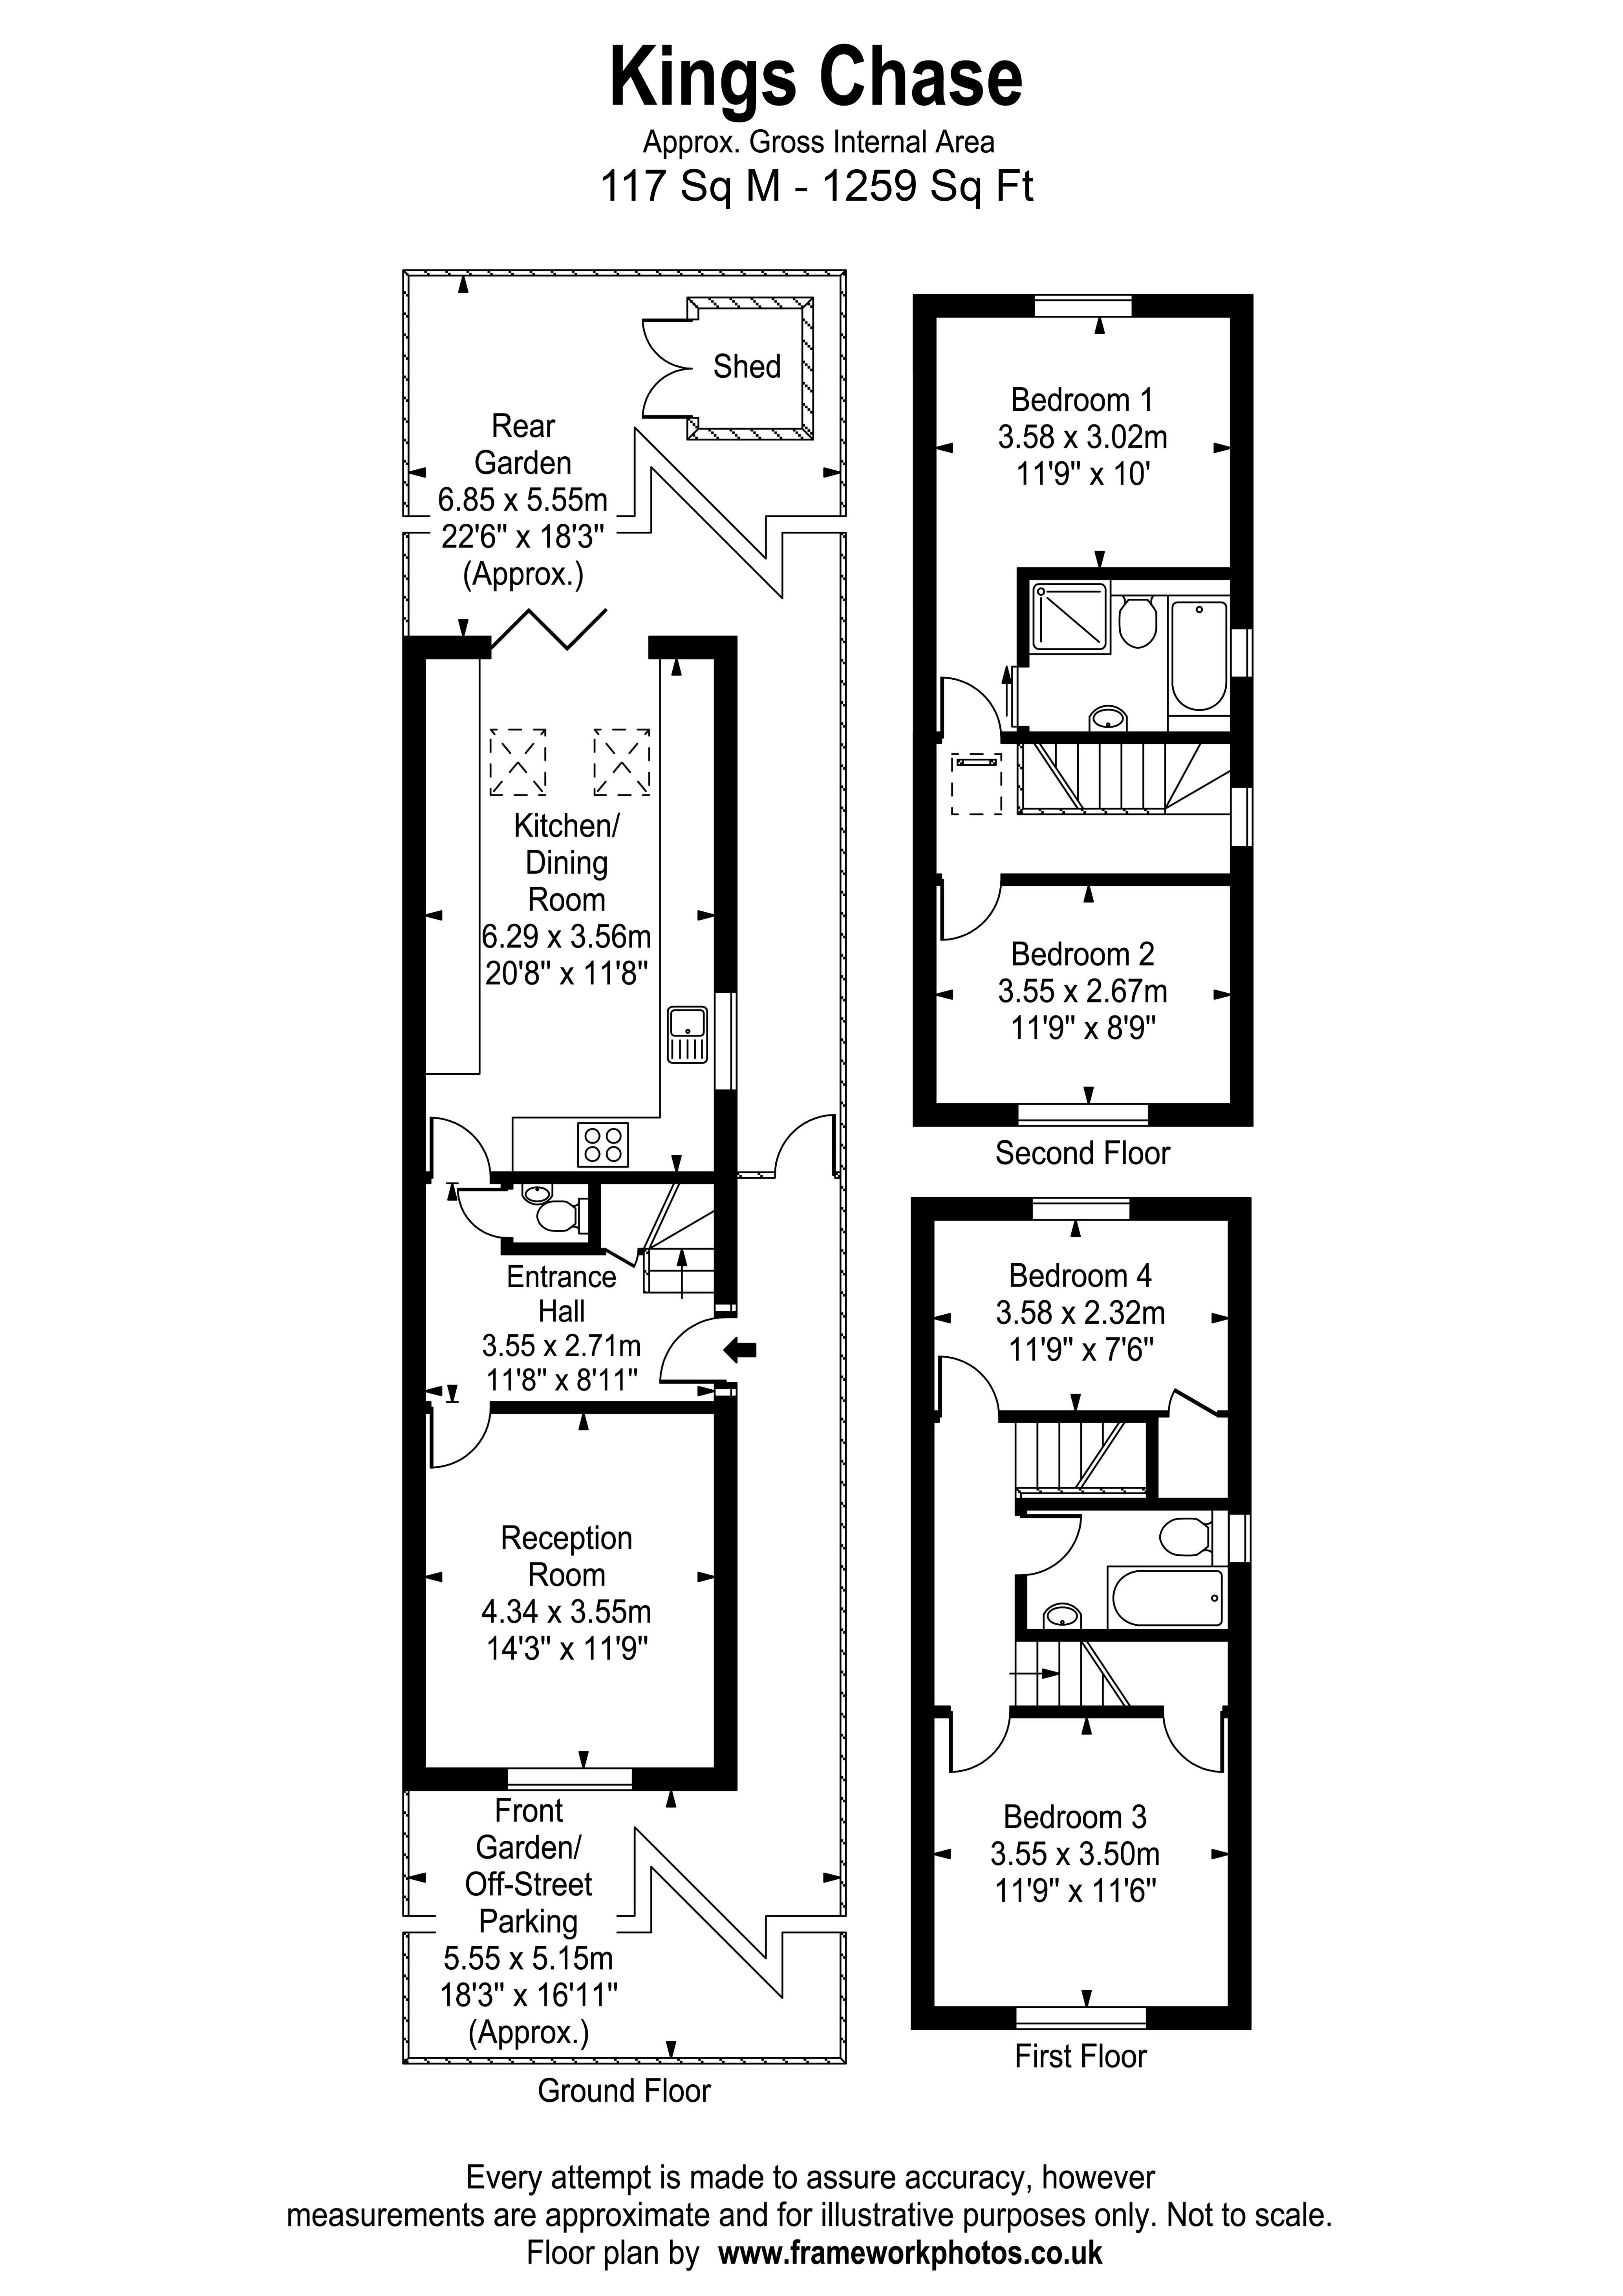 Floorplans For Kings Chase, East Molesey